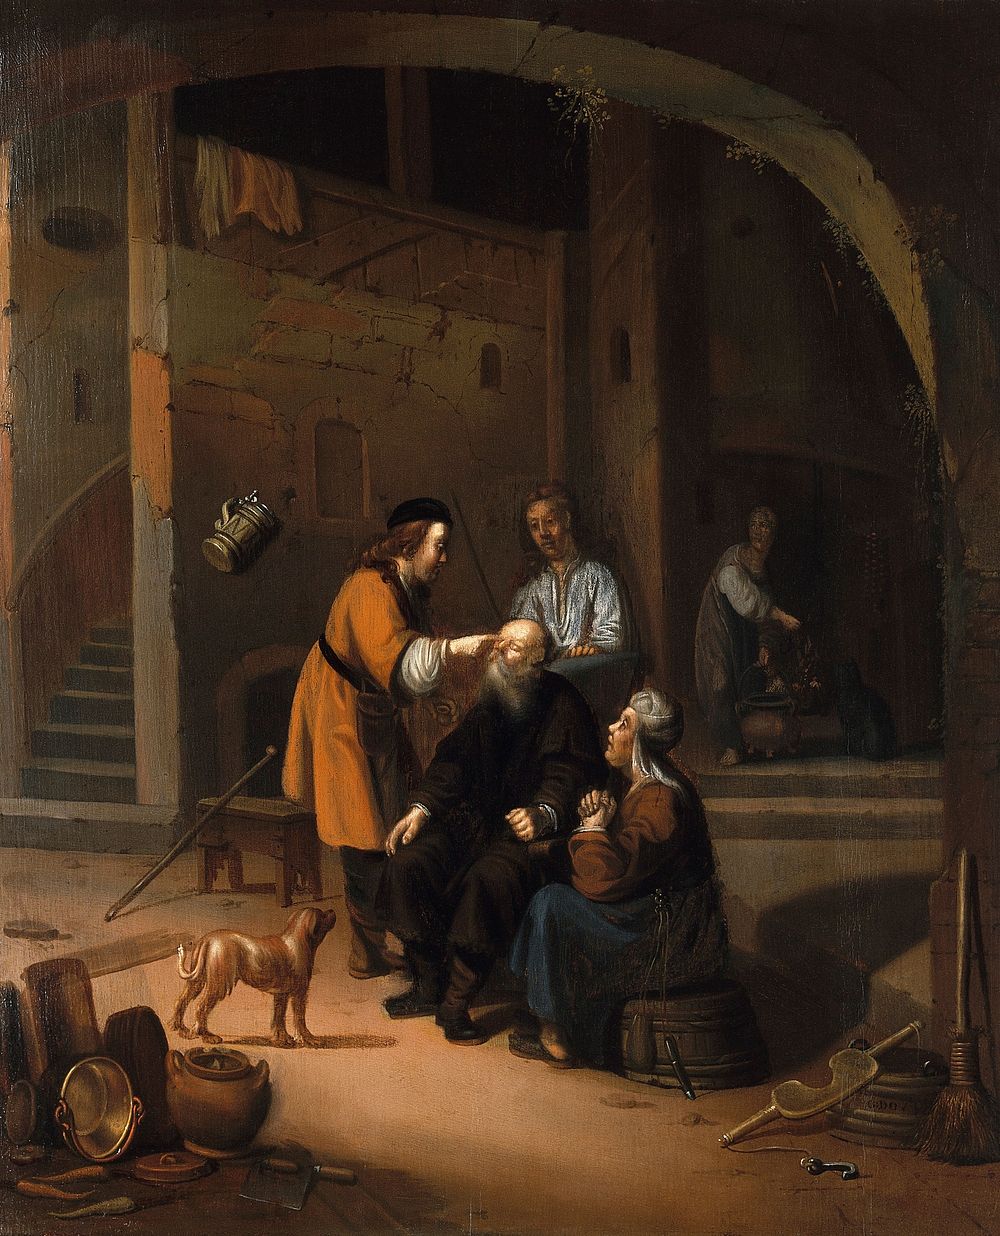 Tobias restoring the eyesight of Tobit. Oil painting by a Dutch painter, 17th century.